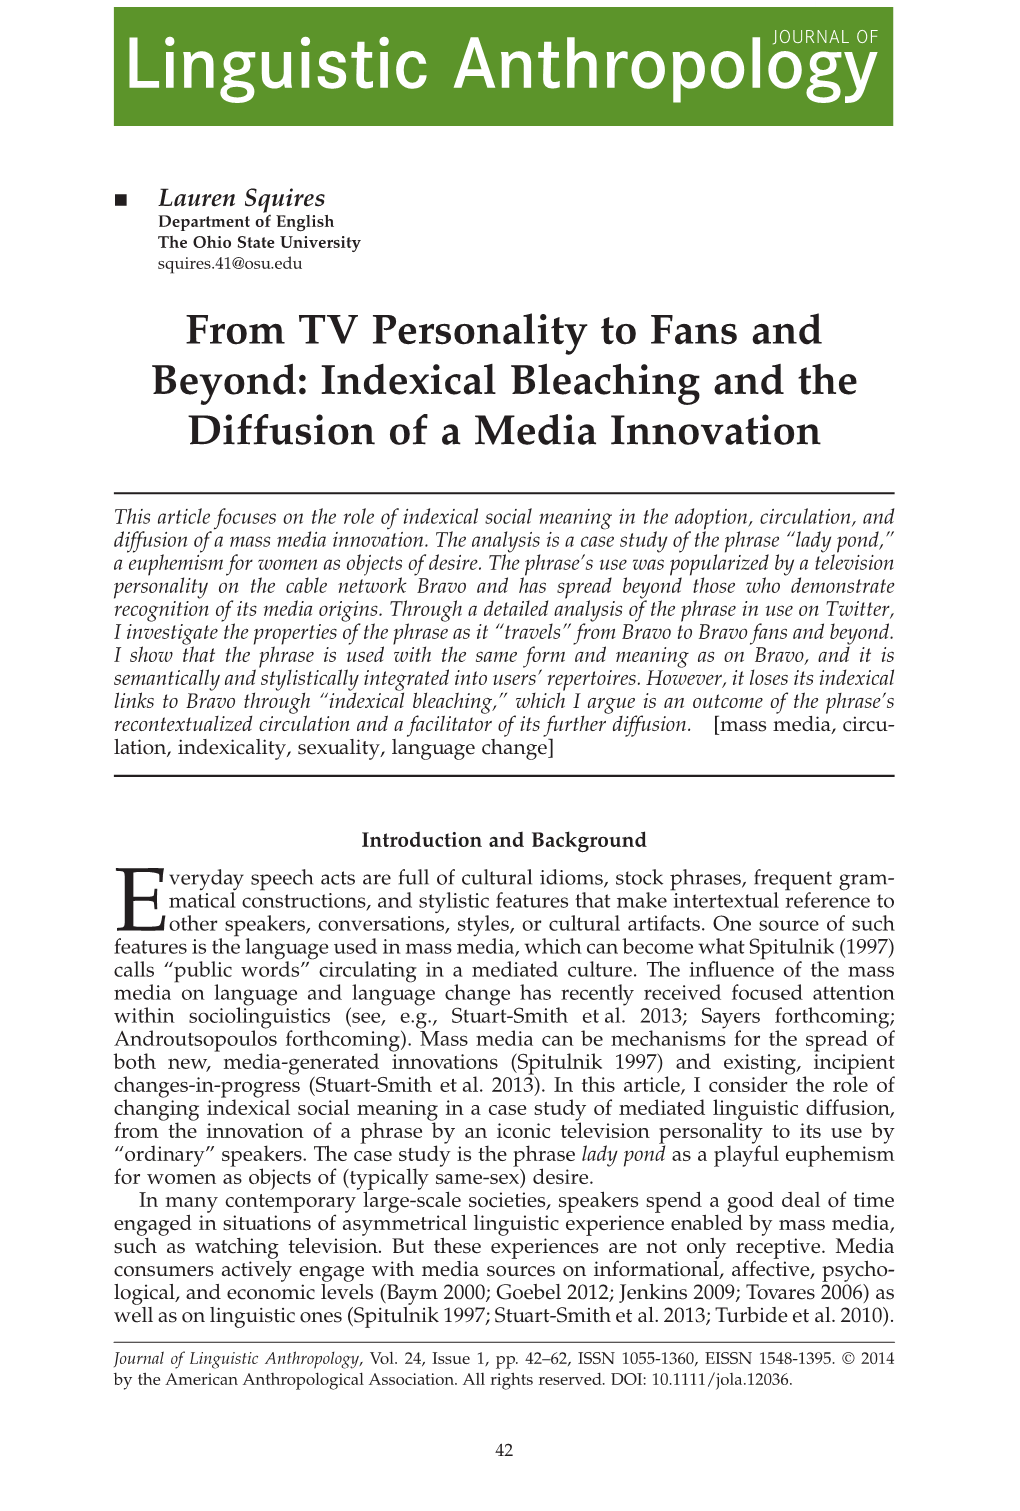 Indexical Bleaching and the Diffusion of a Media Innovation